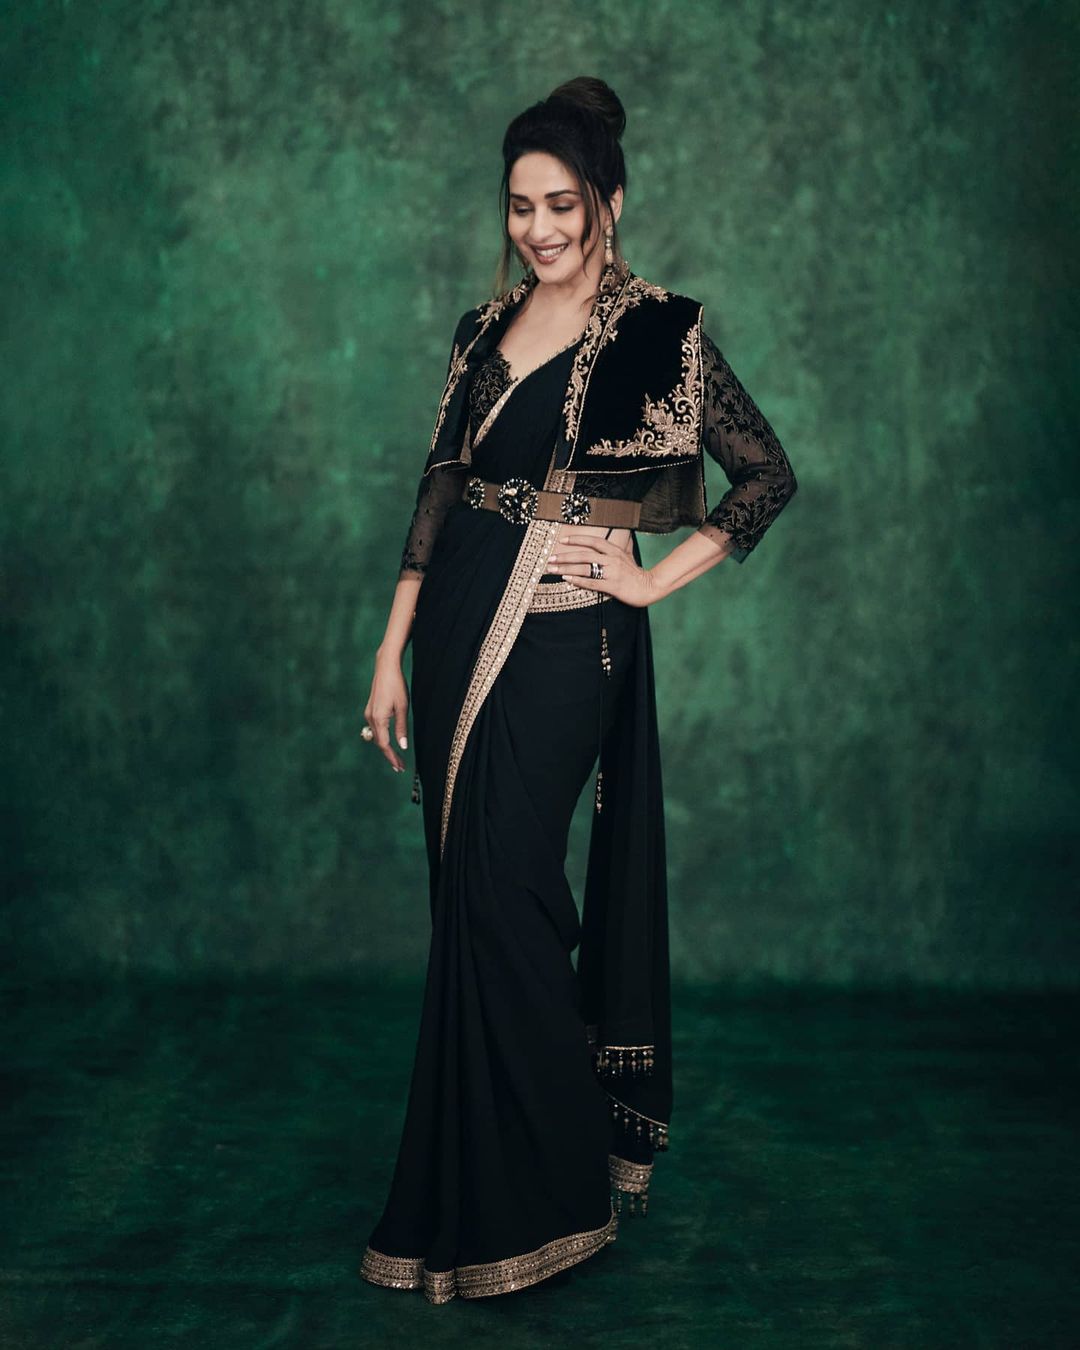 Madhuri Dixit Nene works her charm in the belted saree with a short jacket.